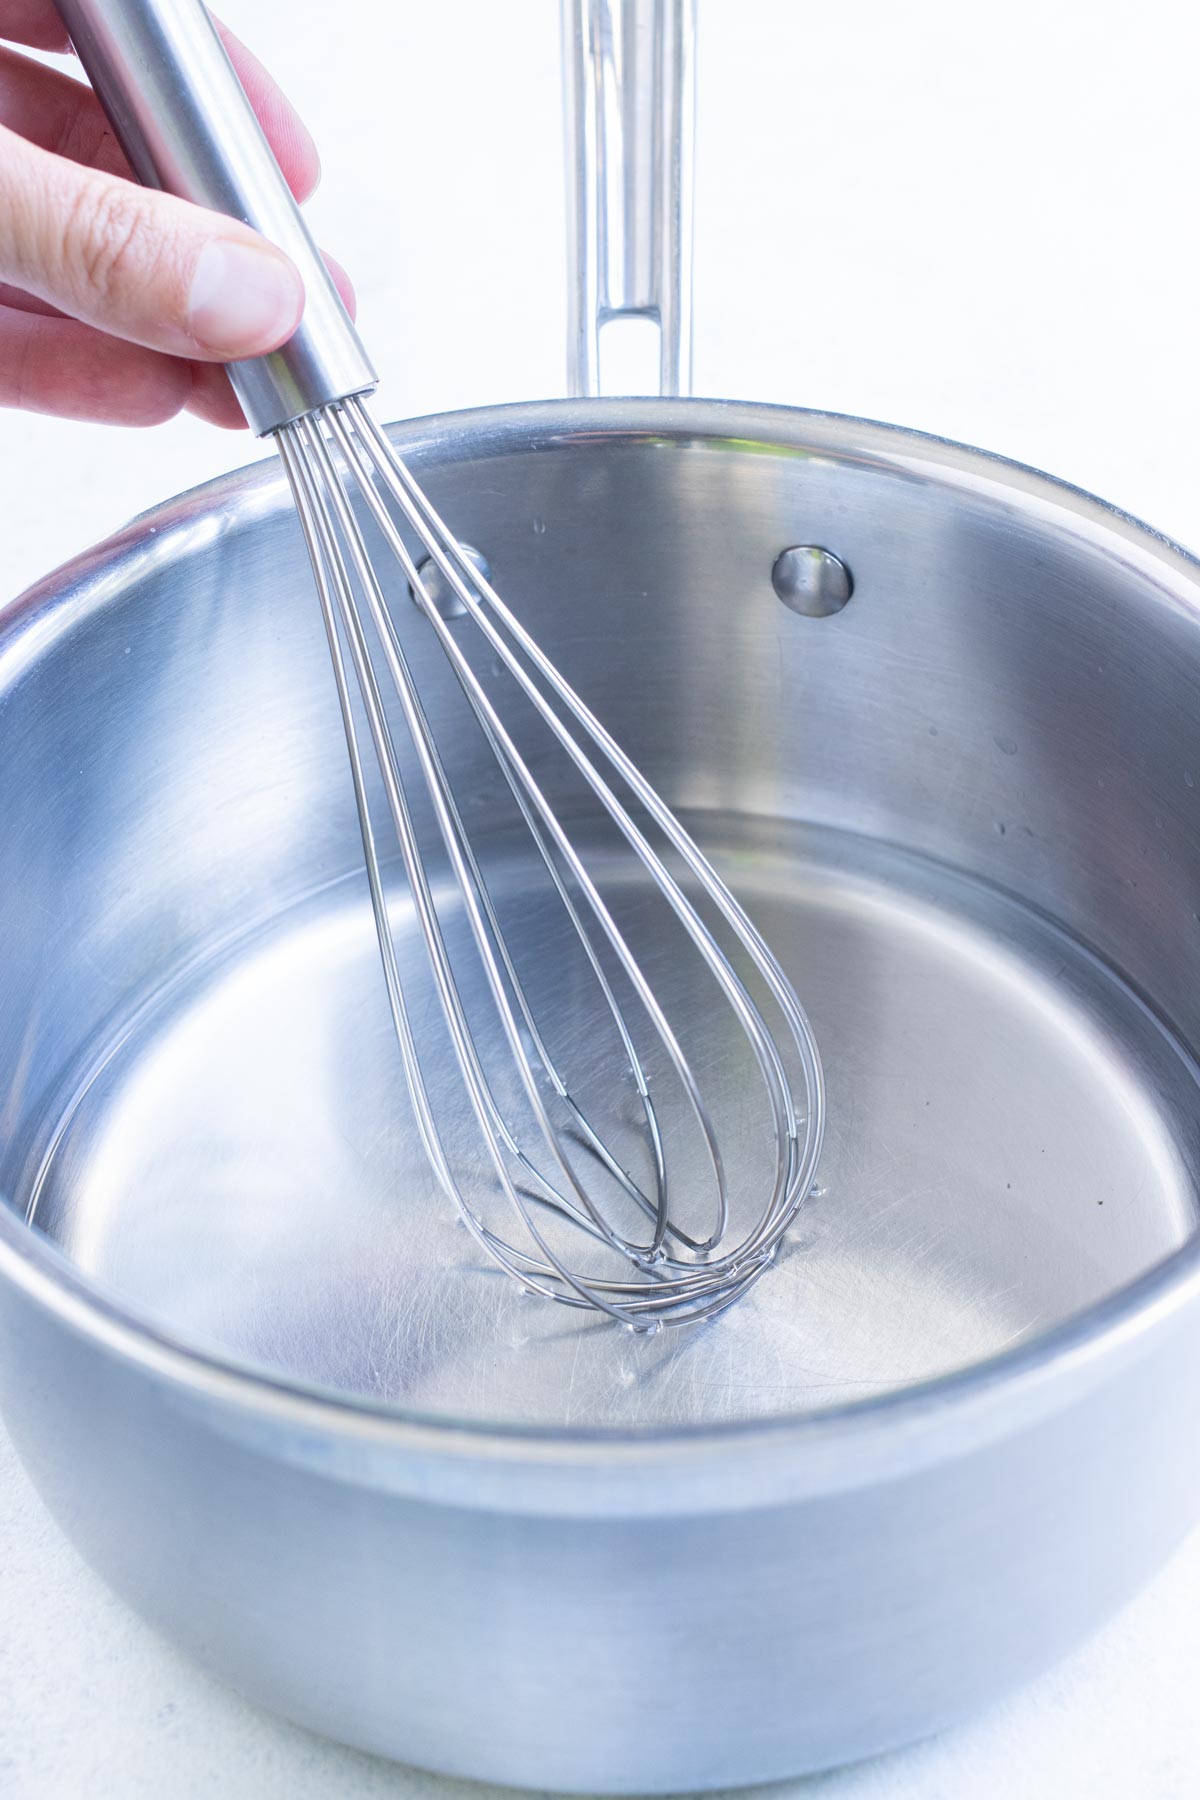 A whisk is used to mix a brining solution in a saucepan.